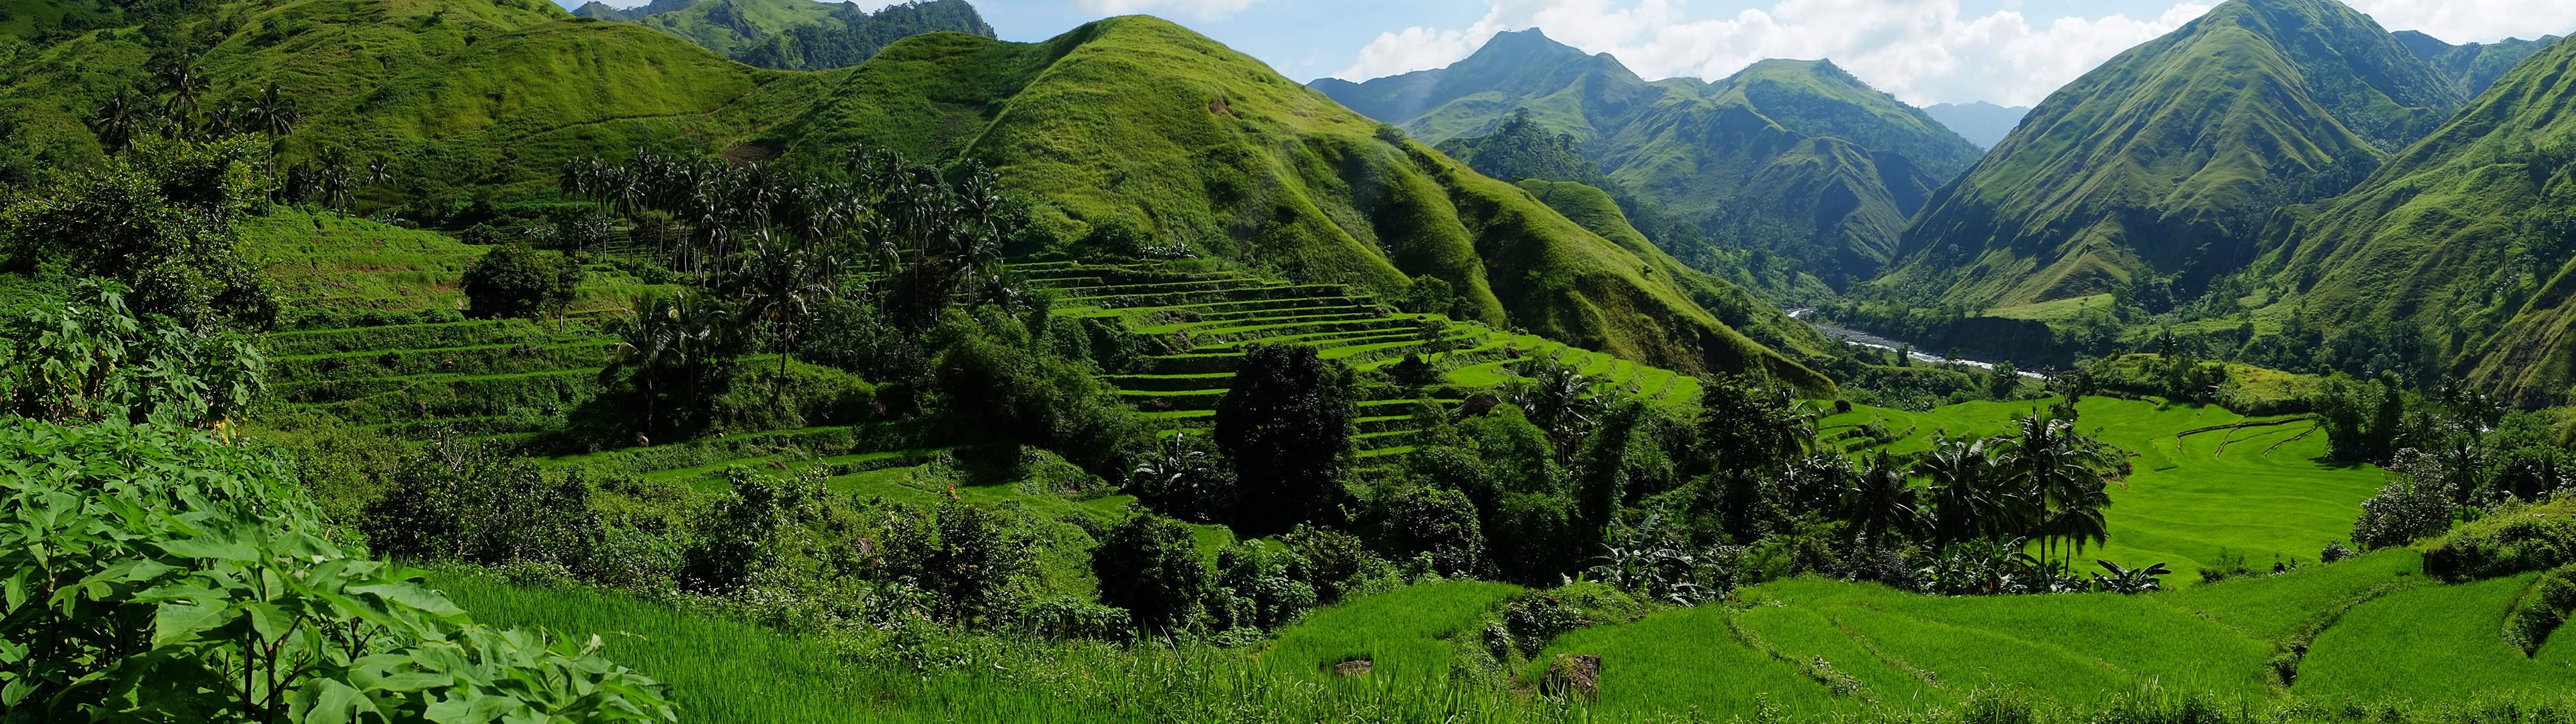 Antique Rice Terraces. Photo by Ruperto Quitag 